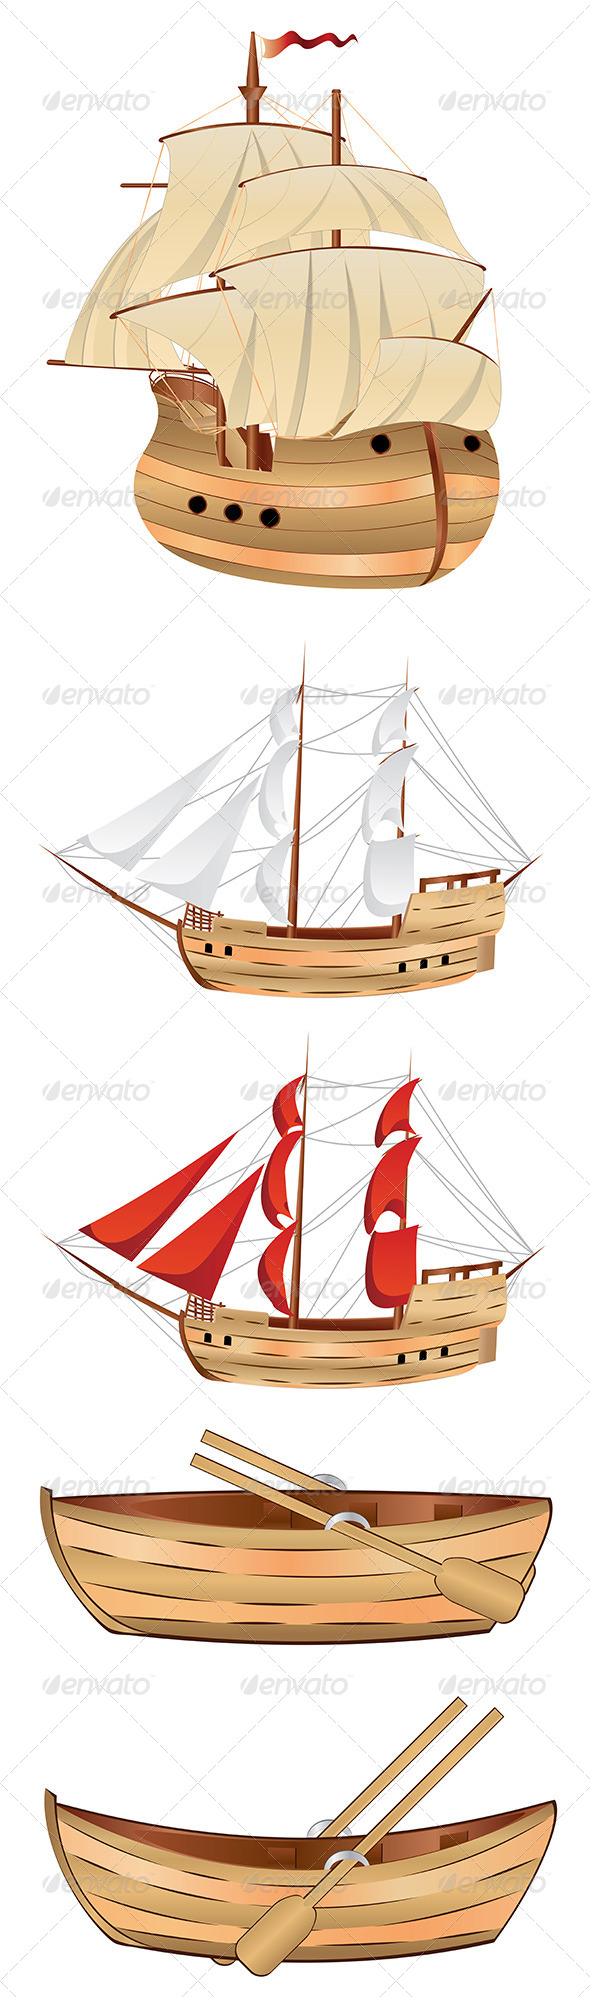 GraphicRiver Old Sailing Ship 7699459